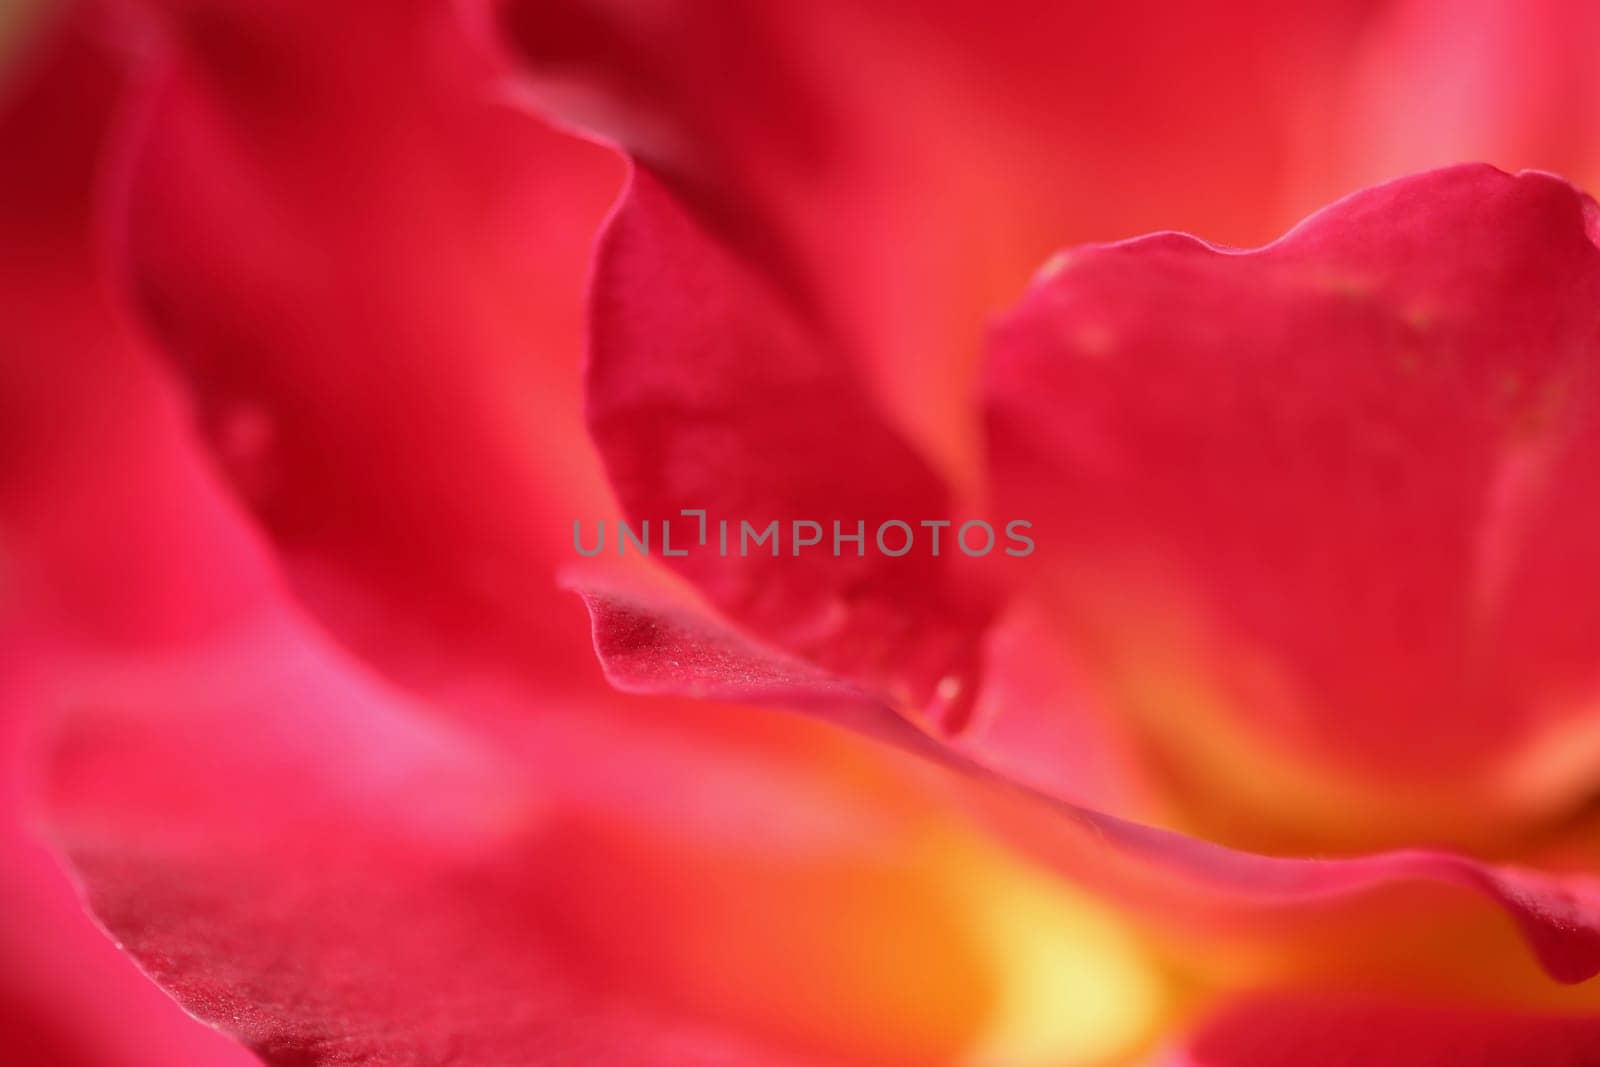 Pink yellow rose flower. Macro flowers background for holiday design. Soft focus